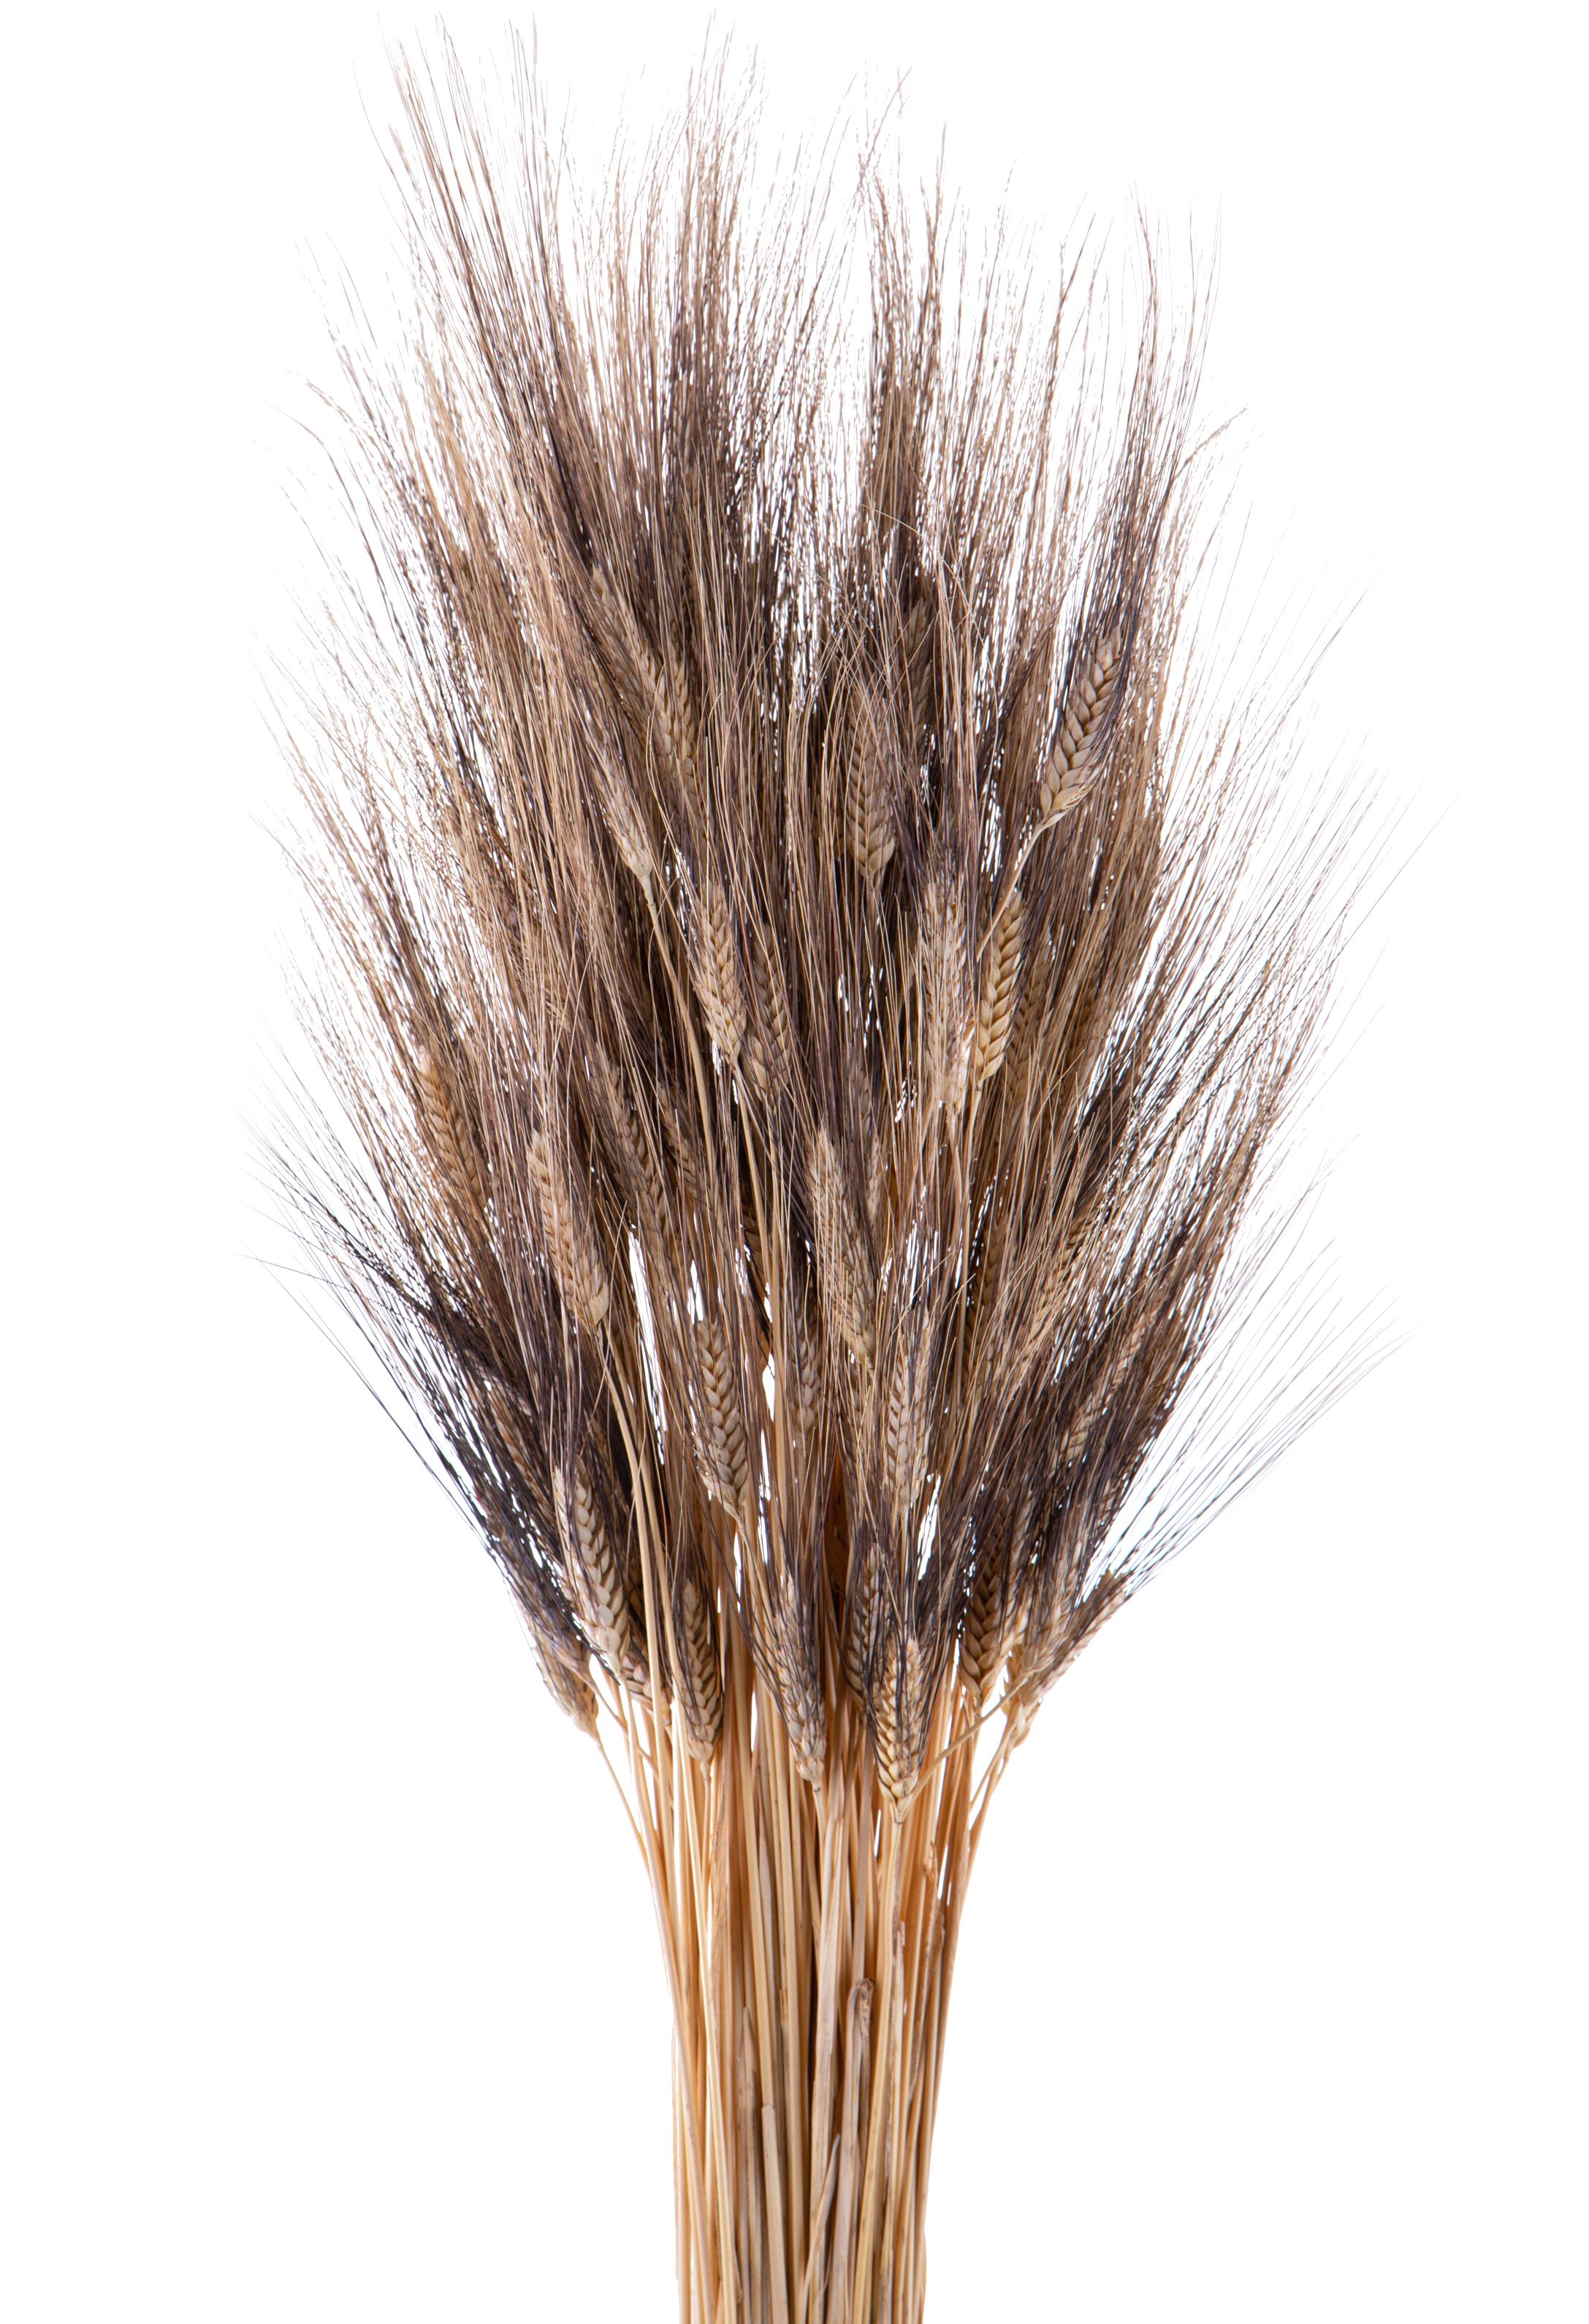 NATURAL PRODUCTS DRIED FLOWERS AND ERBS, NATURAL GRASS, GRANO TRITICUM 50 PZ 90 CM BF/NERO CARTO